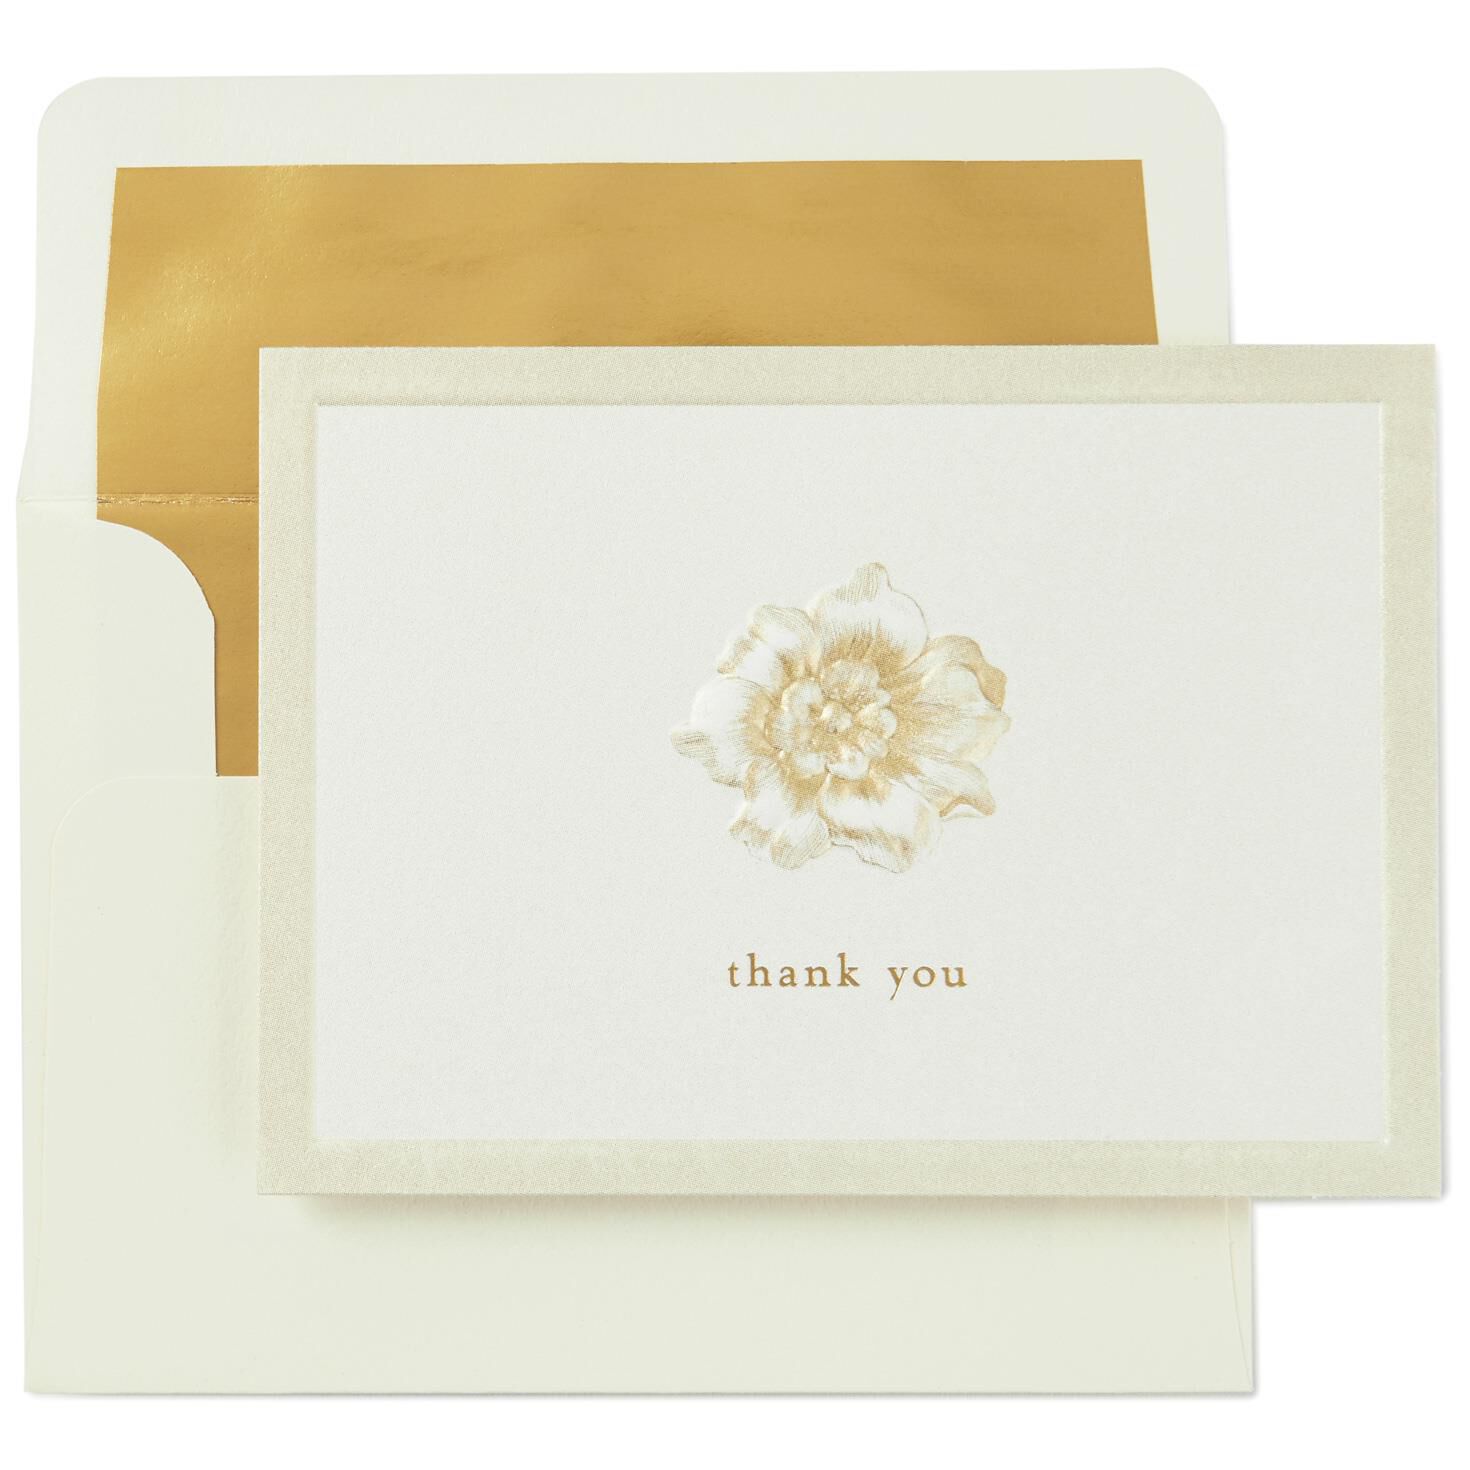 Details about   Hallmark THANK YOU Card by Signature ~ Paper Crafted Floral Display Gold & White